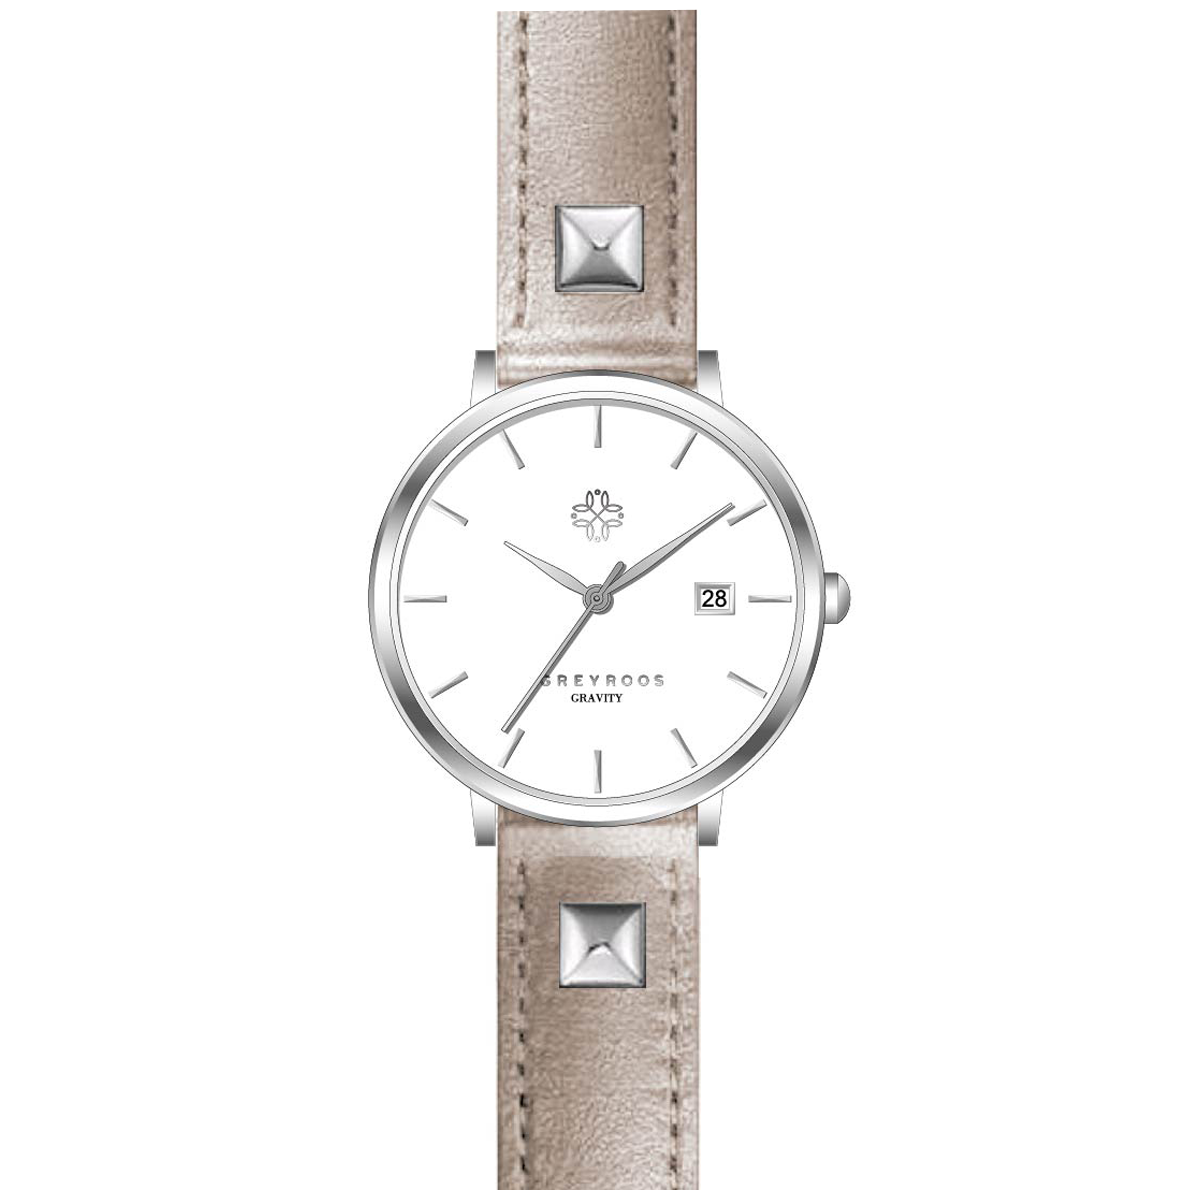 Greyroos Women Watches Gravity